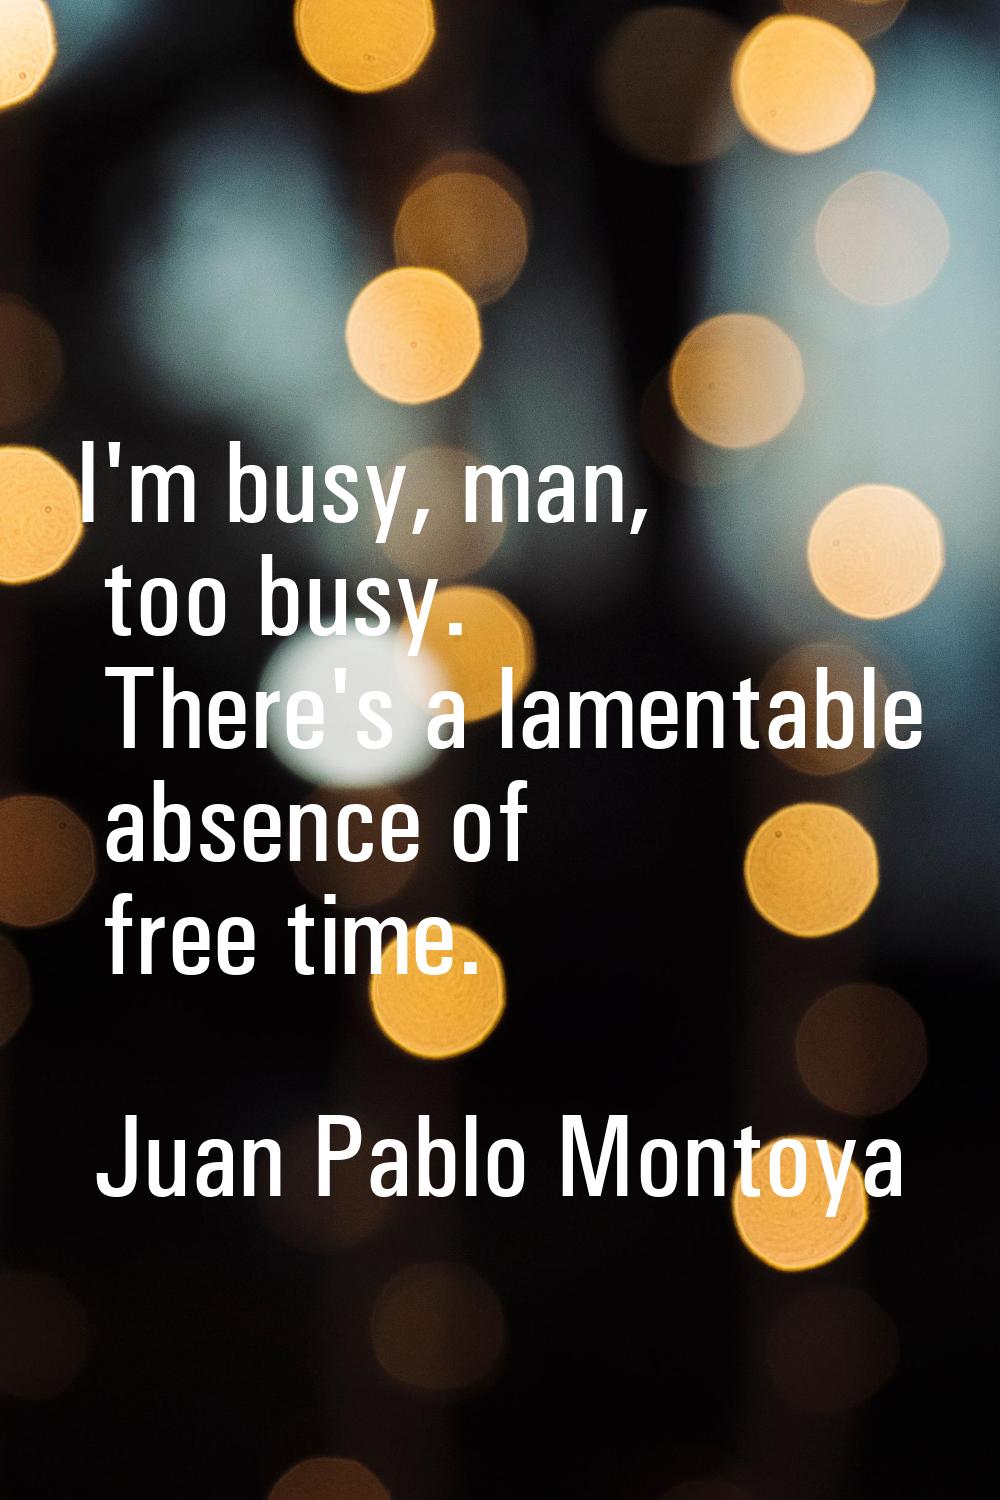 I'm busy, man, too busy. There's a lamentable absence of free time.